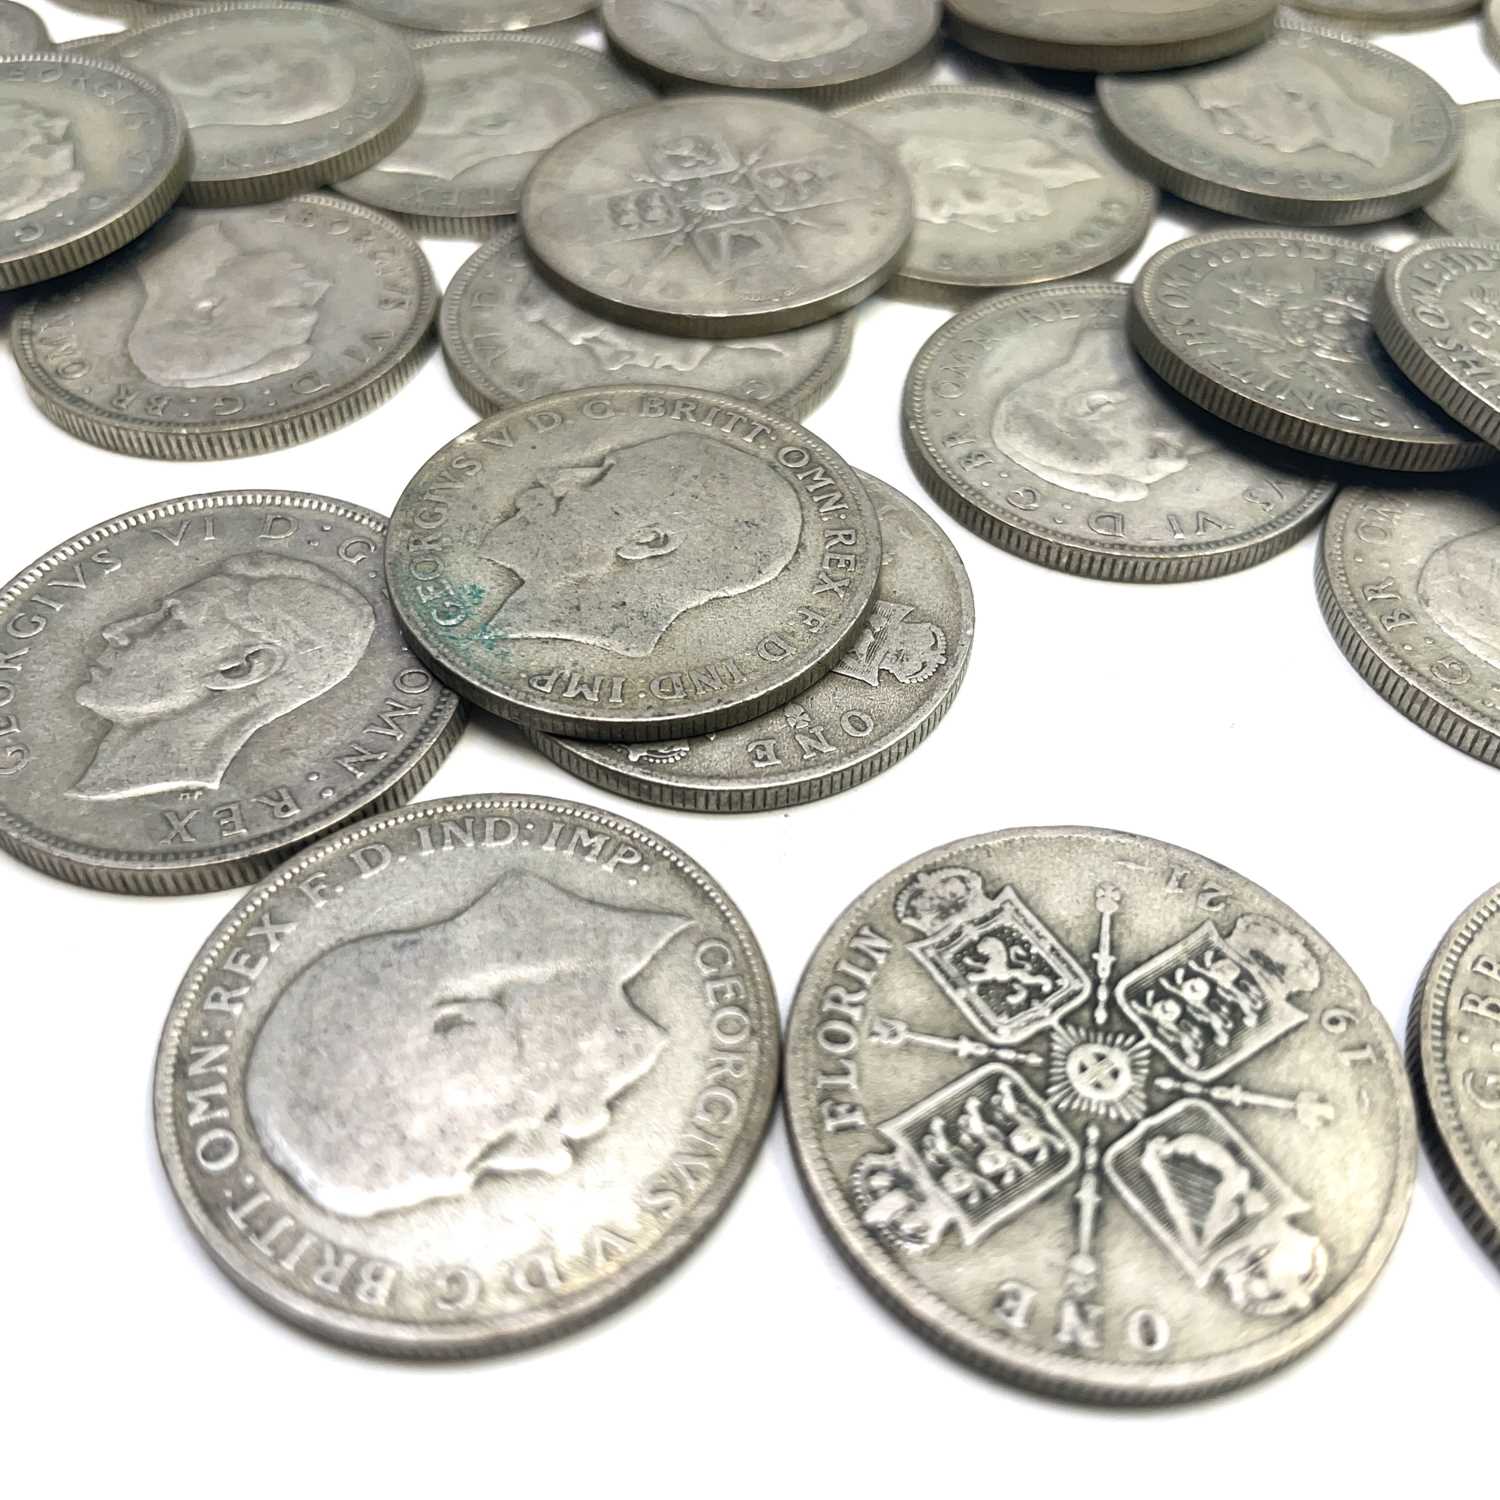 G.B. Pre 1947 Silver Coins. Comprising a bag containing £5 of pre 1947 G.B silver coinage. - Image 2 of 10